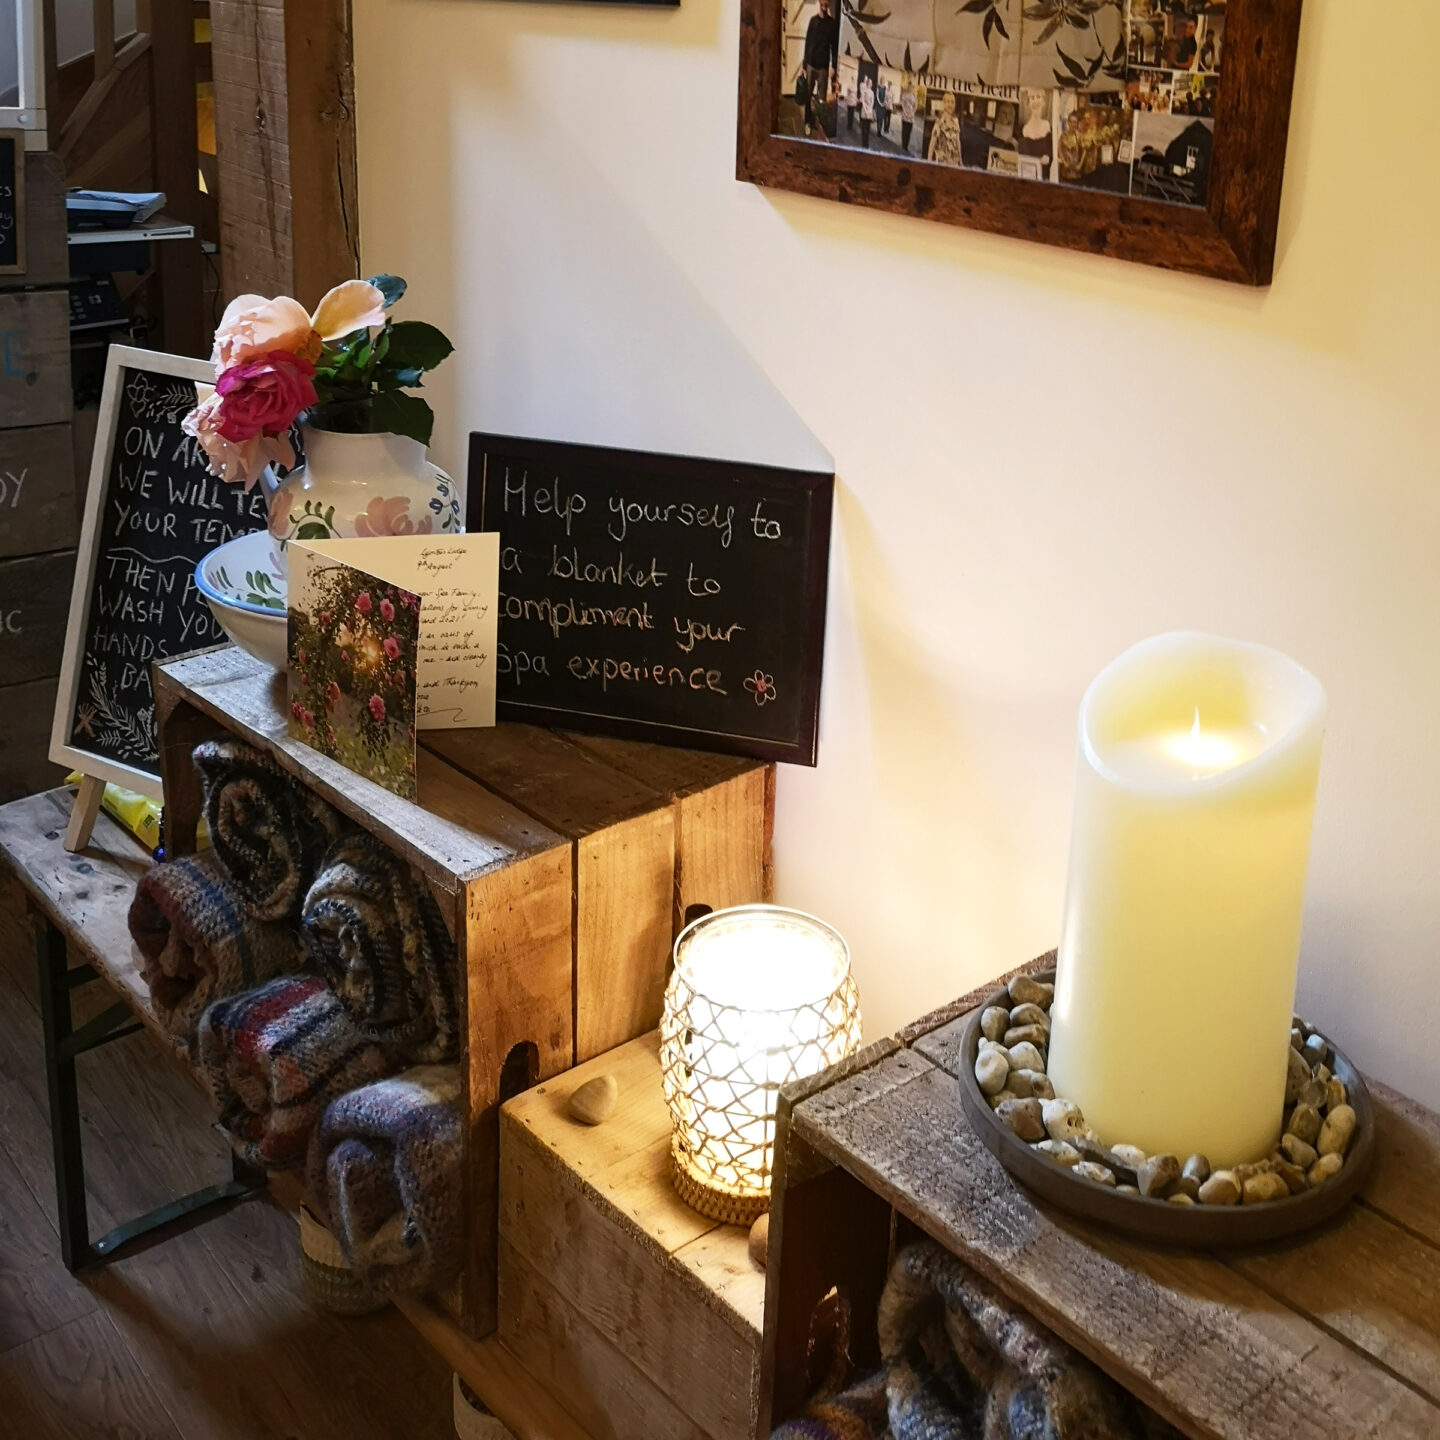 The Granary Spa, Pure Bliss Treatment, Spa Day, Spa Review, Kent Business, Rural Retreat, Things to Do in Kent, Kent, Massage, Holistic Beauty, Beauty Spa, the Frenchie Mummy